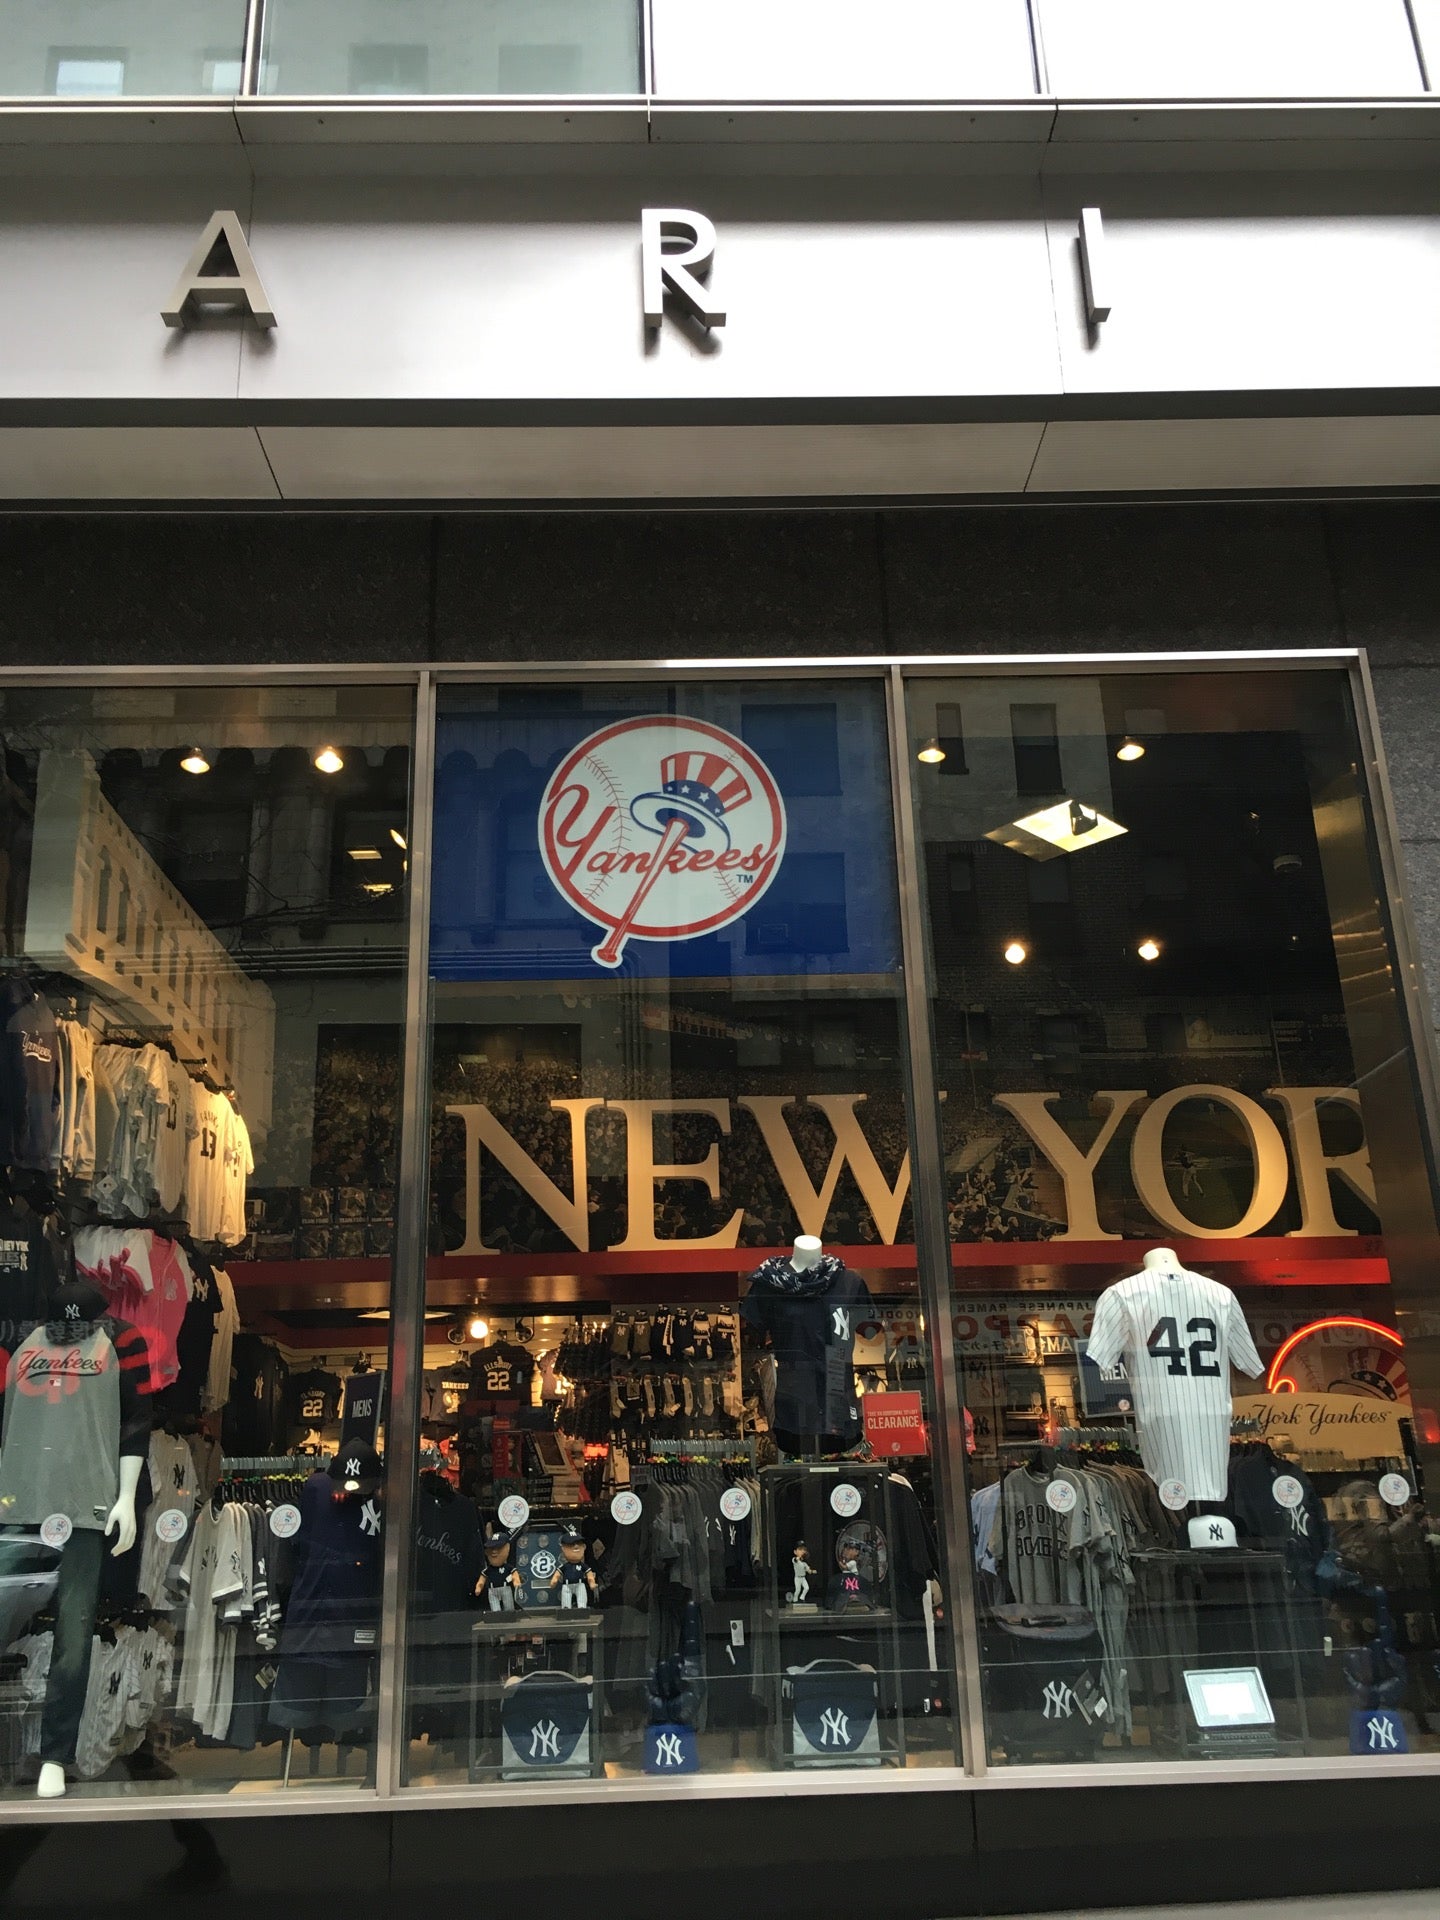 Yankee Clubhouse Shop